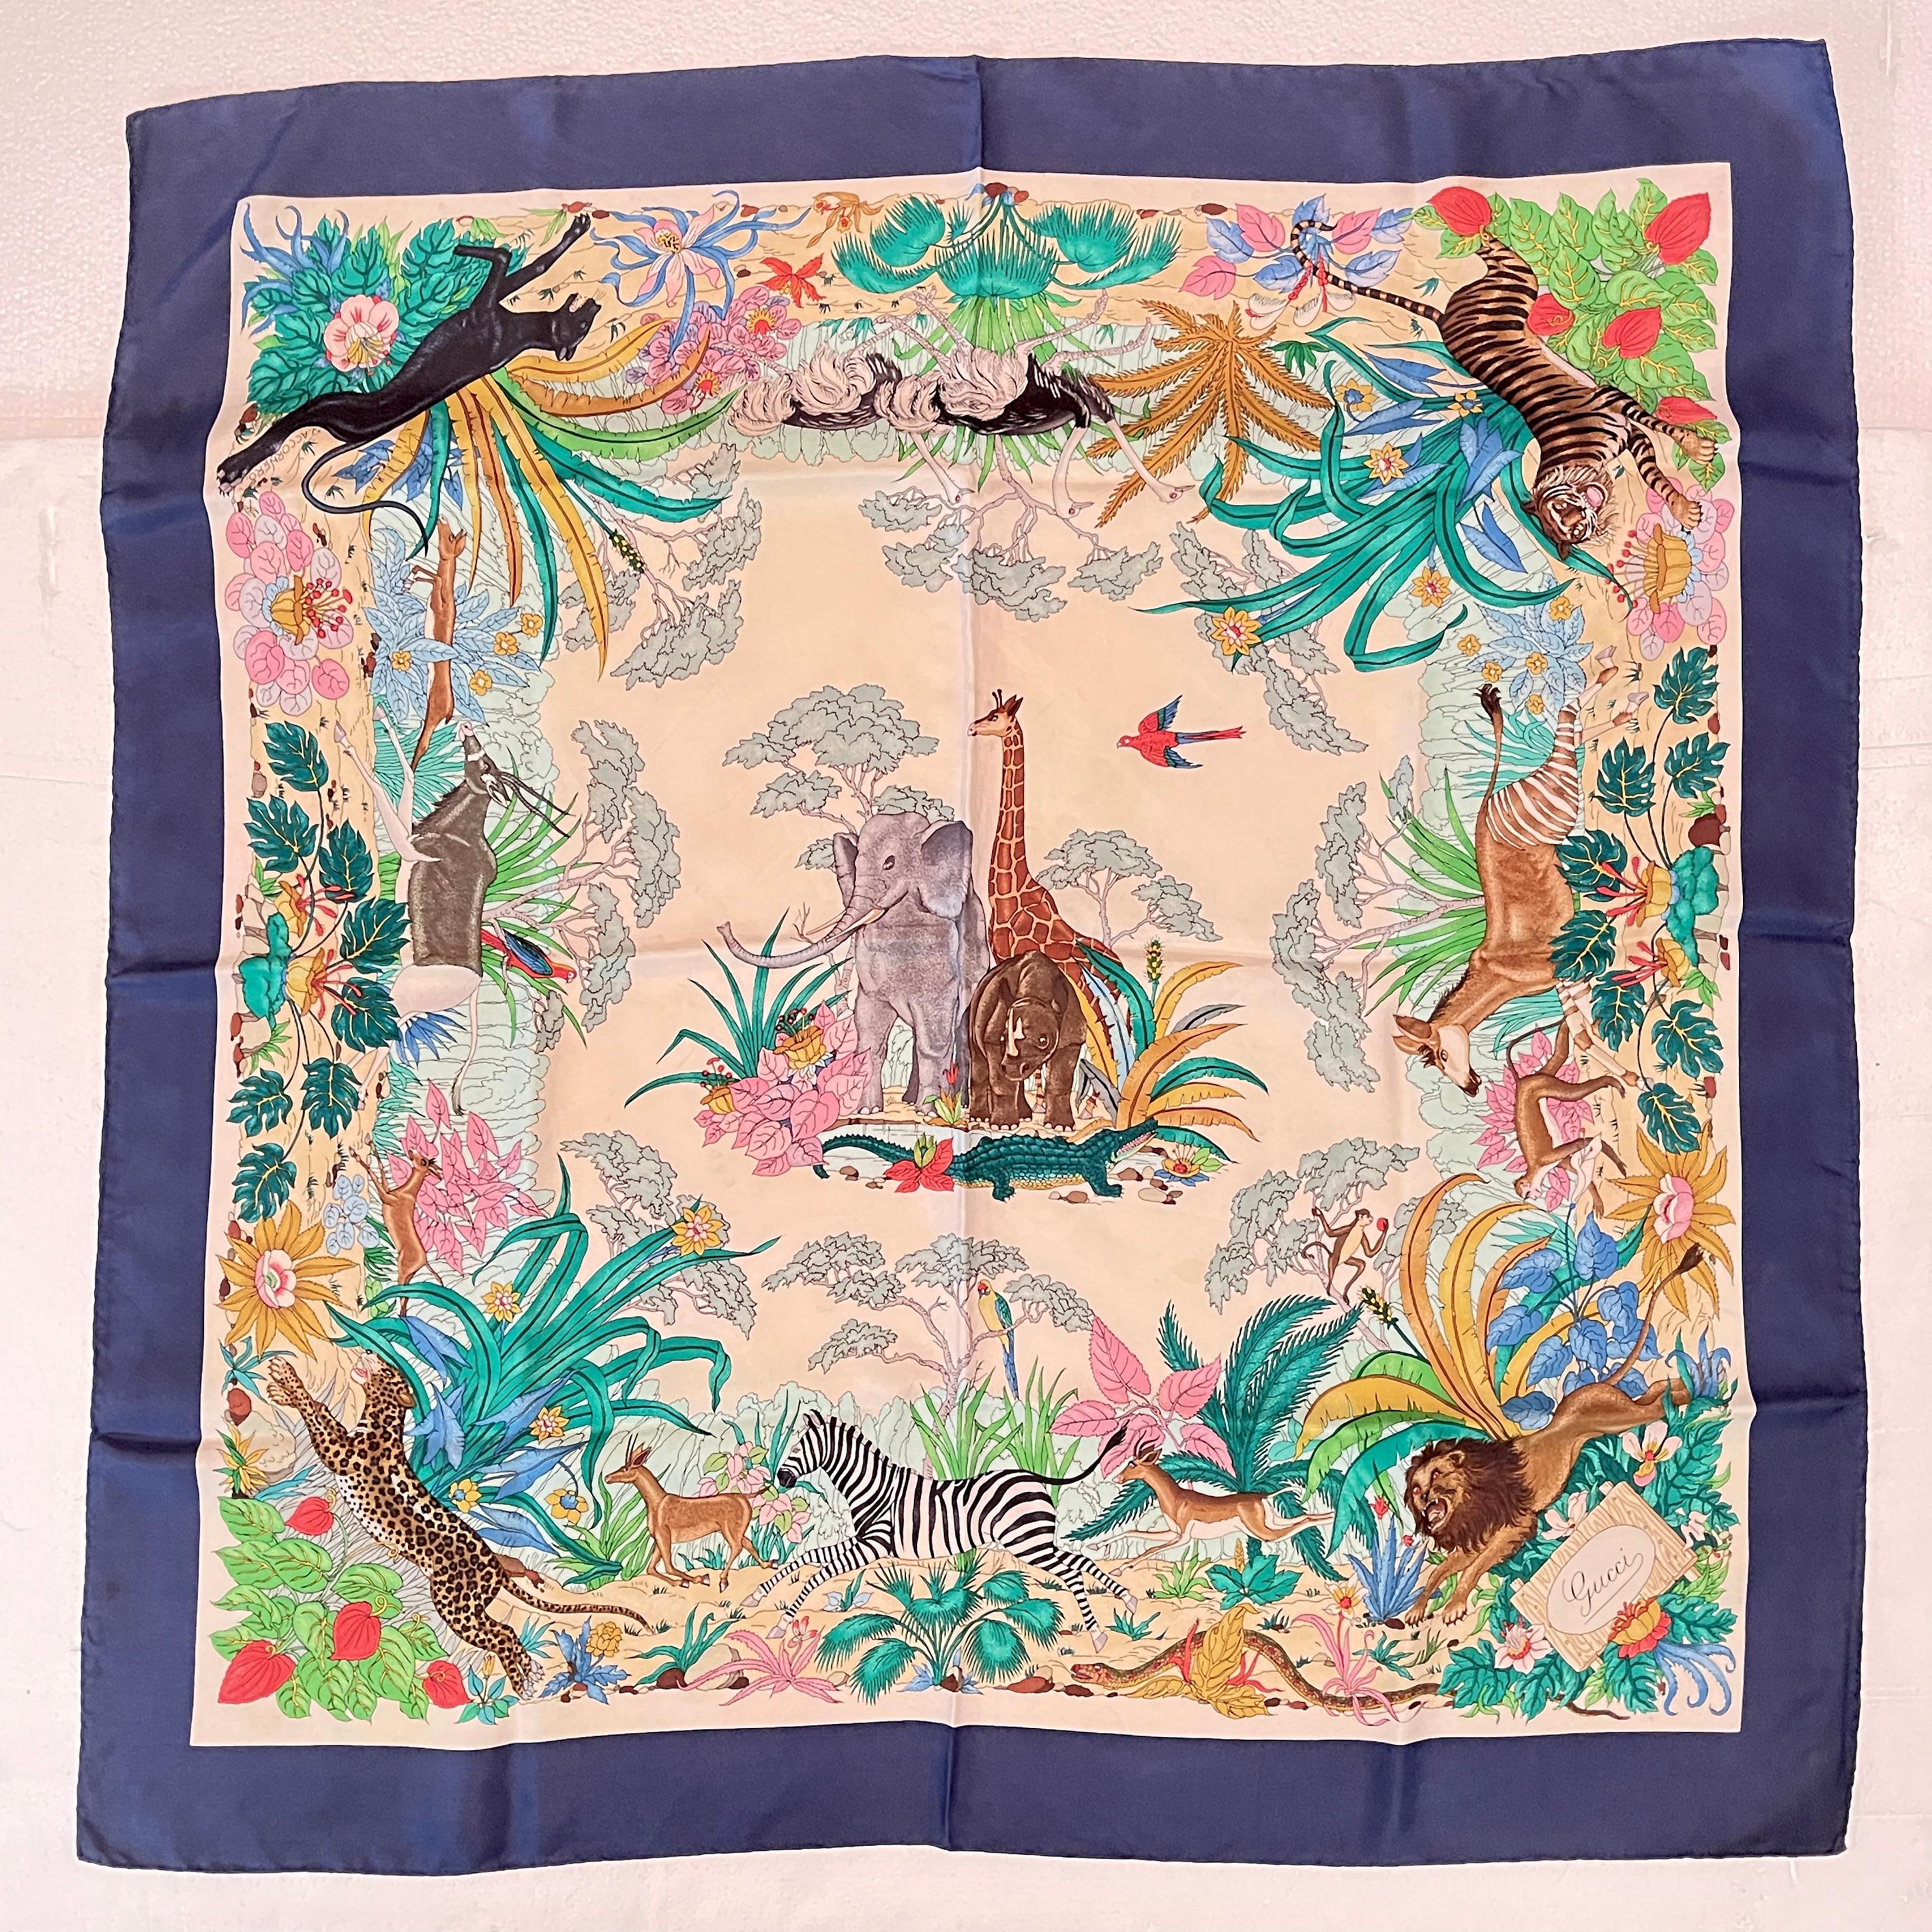 From the Italian fashion house Gucci, and designed by Vittorio Accornero, a vintage silk scarf with an African jungle animal and big cat theme, circa 1970s.

Boldly colored and beautifully detailed, a central motif of Big Game animals – an elephant,